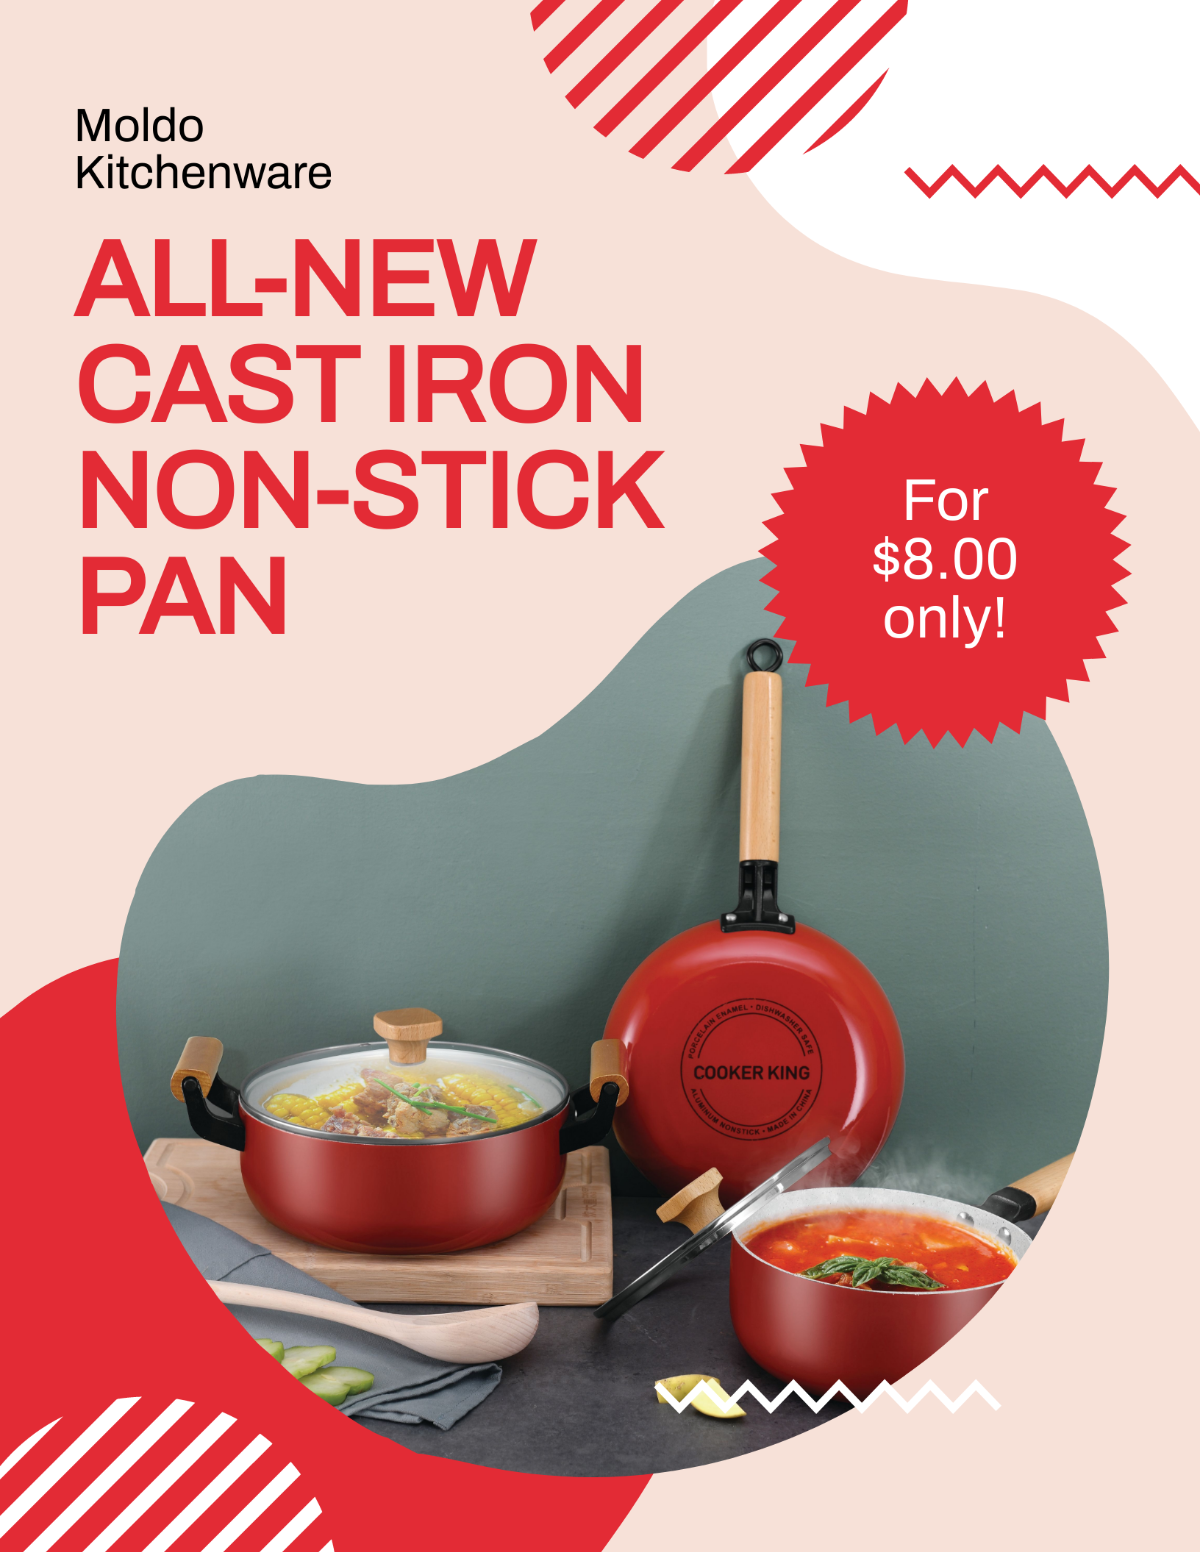 Kitchenware Product Flyer